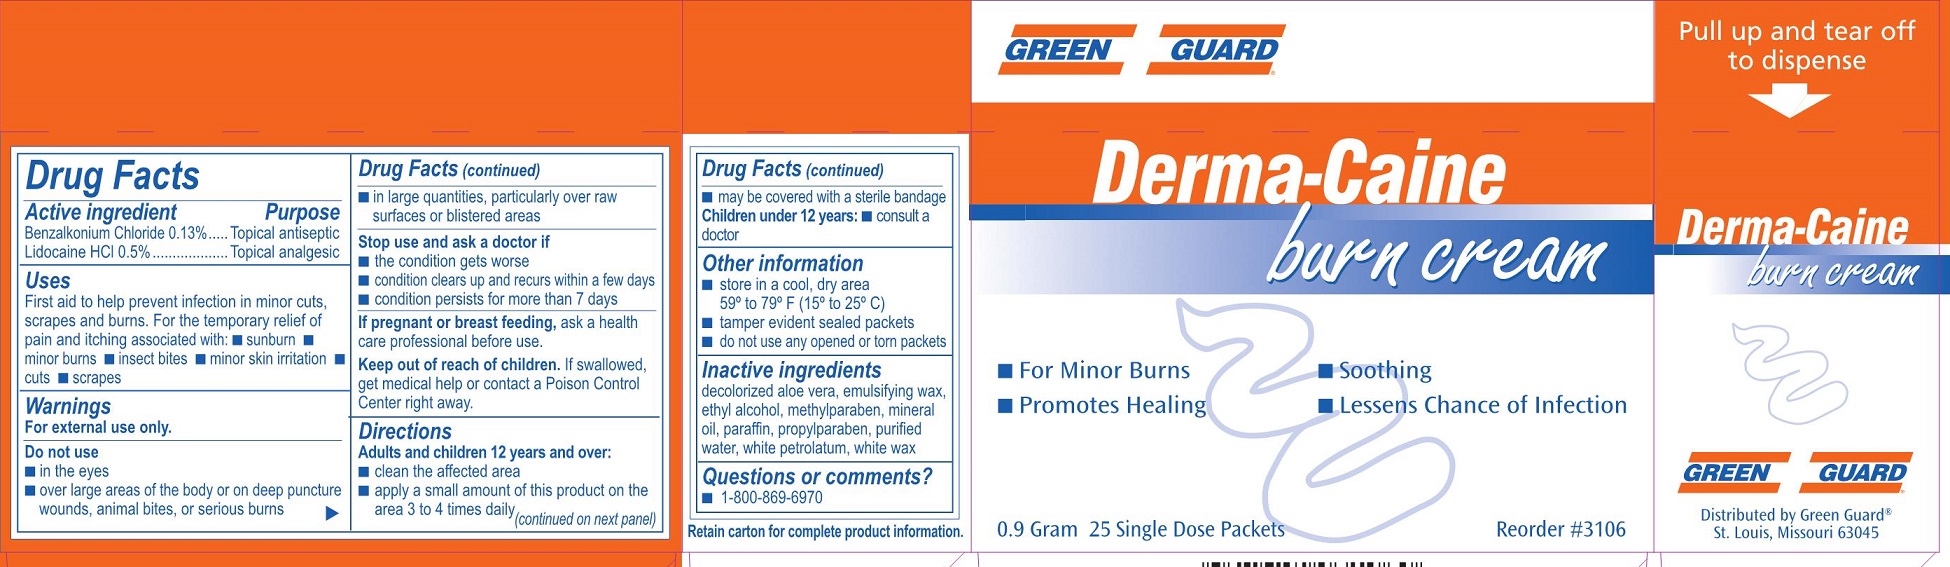 GG Derma Caine 25 count